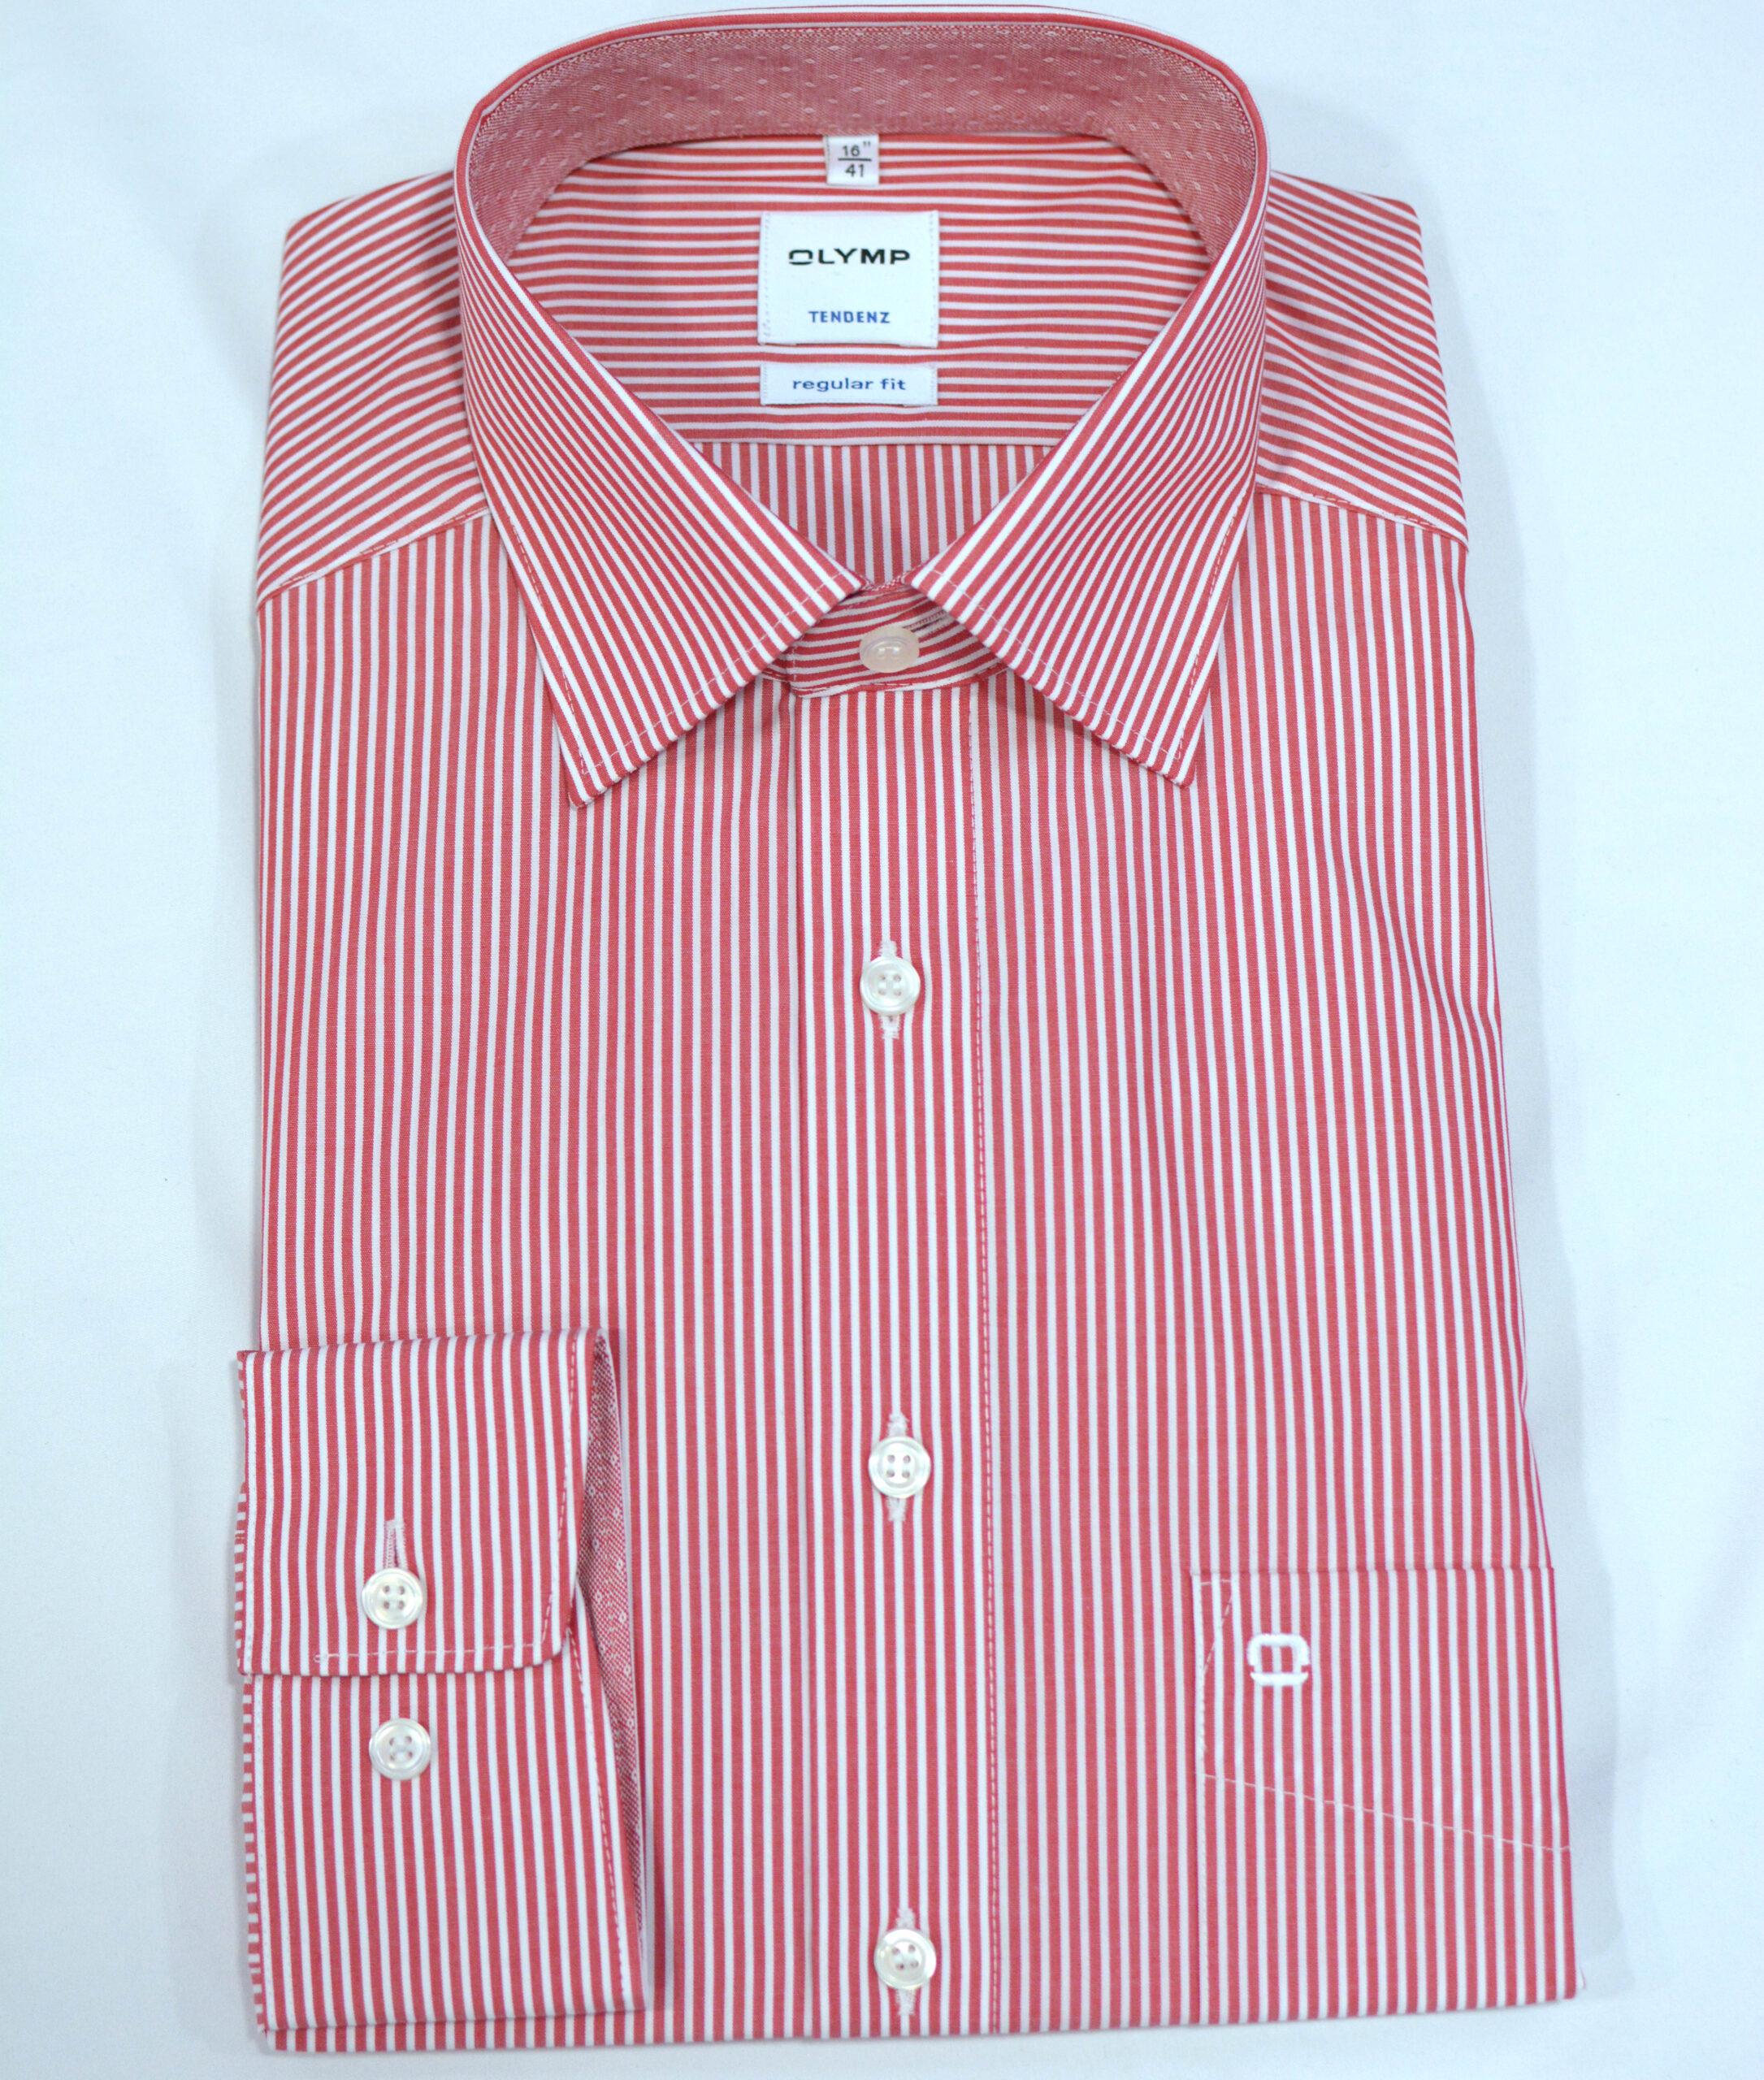 OLYMP LONG SLEEVED RED BENGAL STRIPED SHIRT – REGULAR FIT - Cain of Heswall